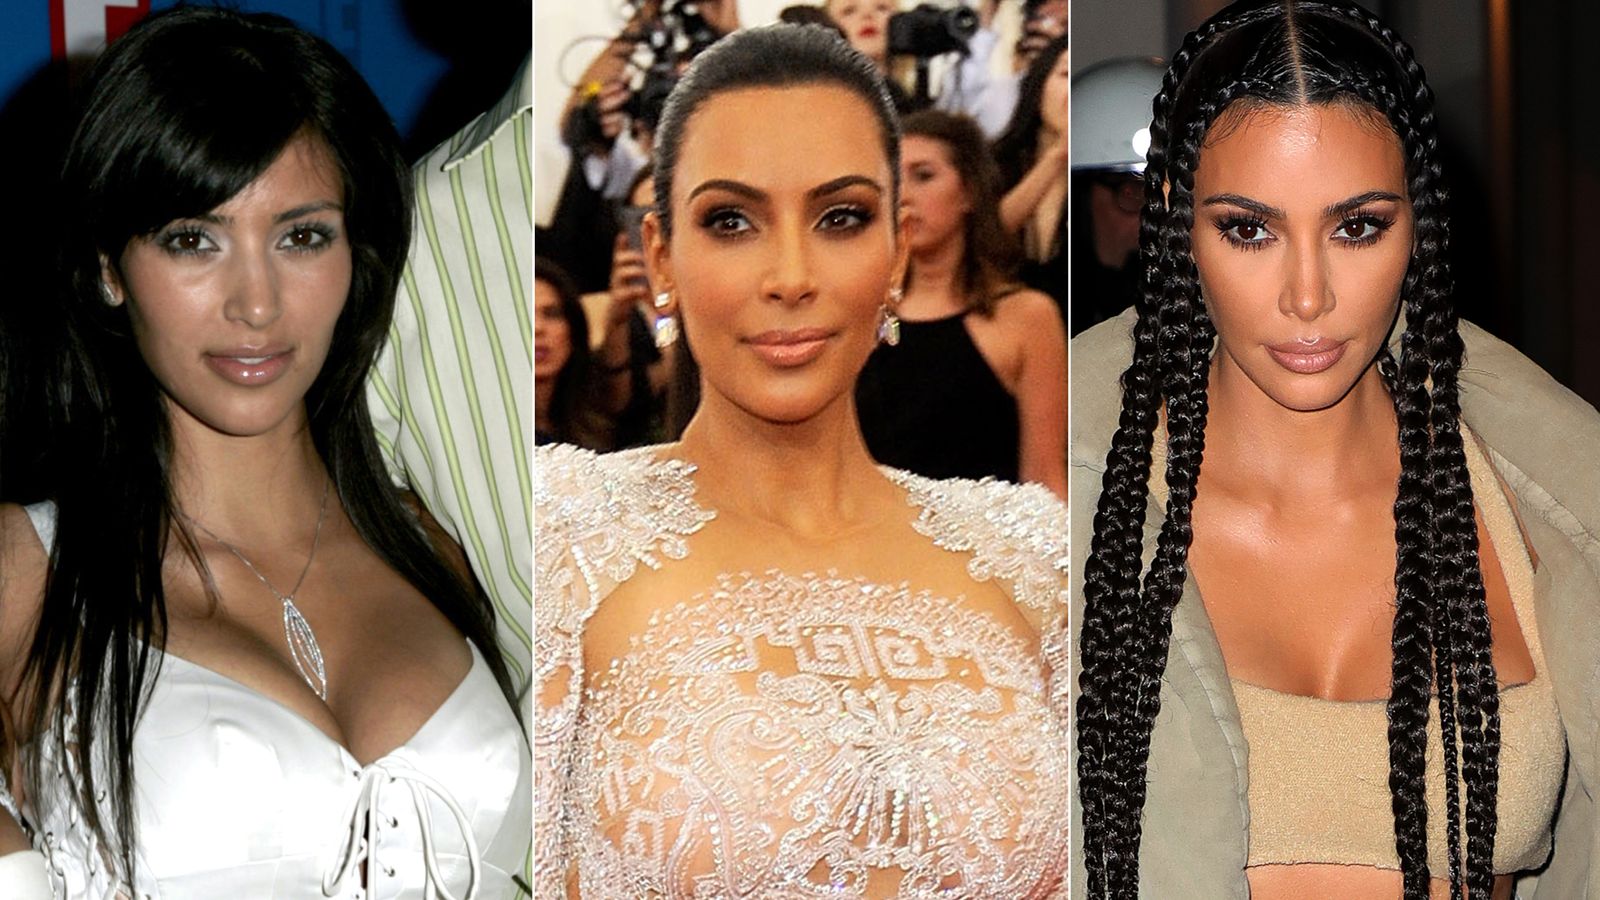 Kim Kardashian turns 40 - here's a look at her rise to fame in pictures |  Ents & Arts News | Sky News